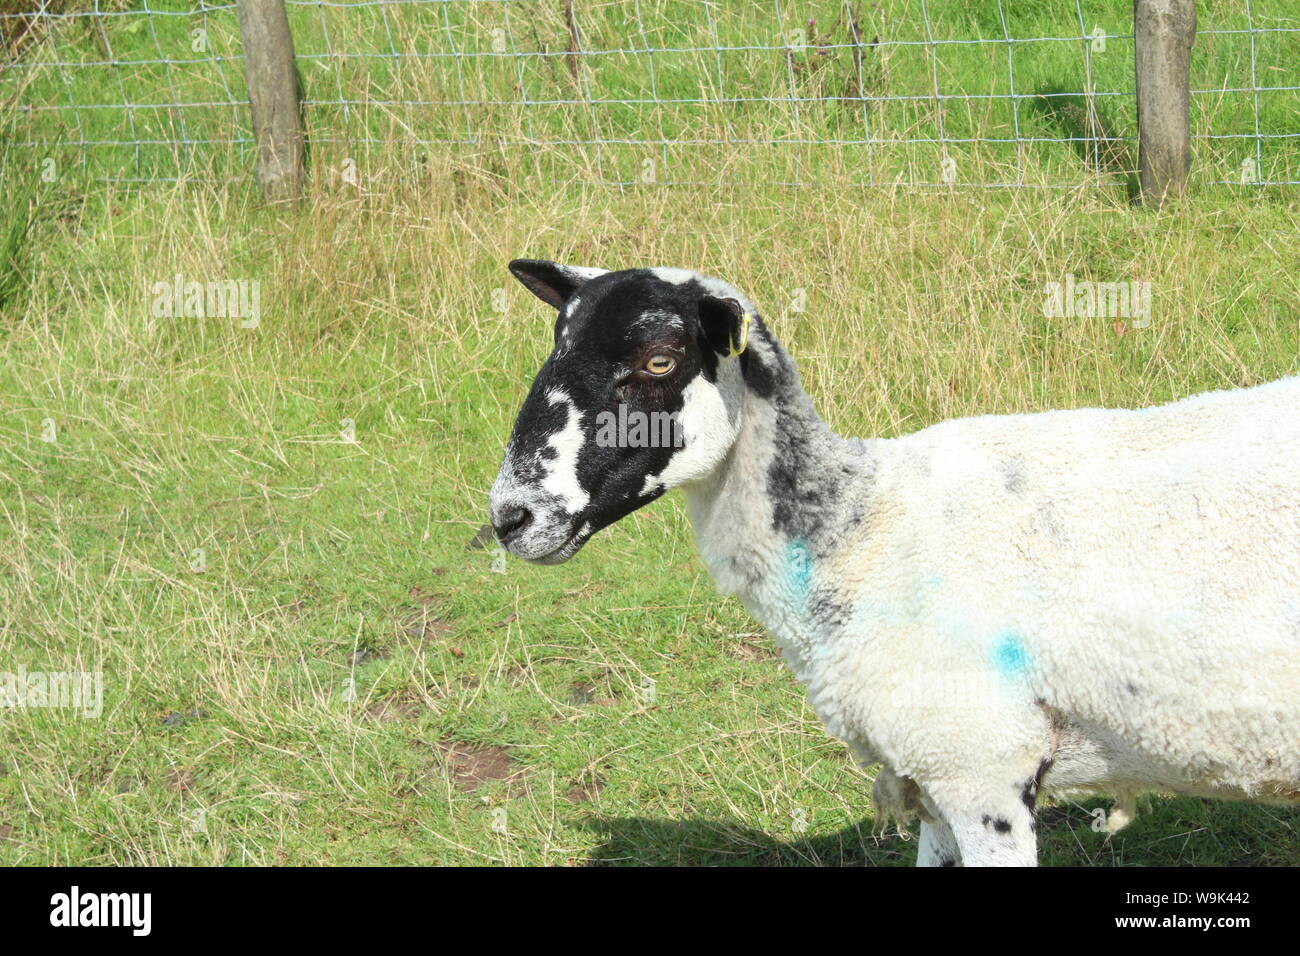 Image of a white sheep with half black face and marked with blue paint, stood up on long grass in front of a fence at Rivington Pike Stock Photo